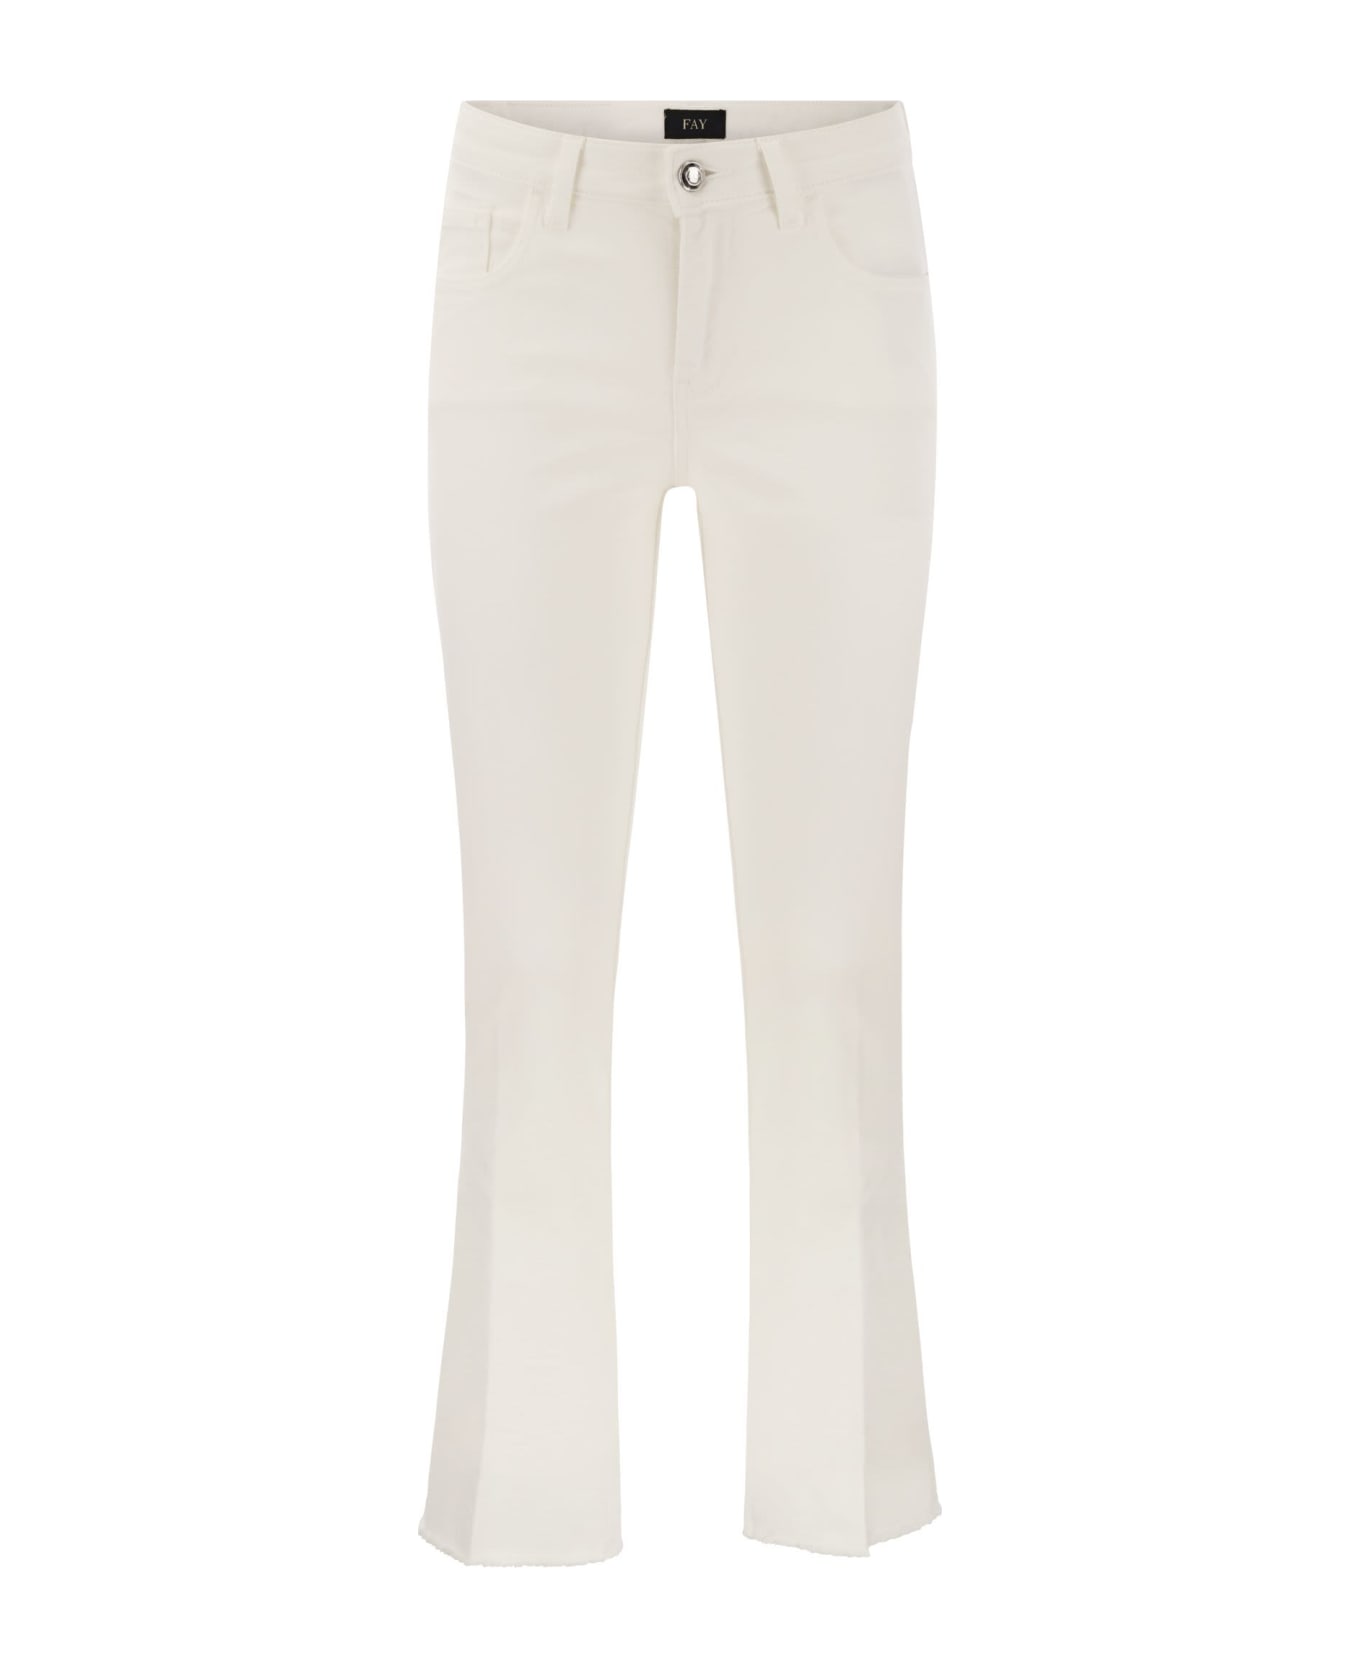 Fay 5-pocket SAMS Trousers In Stretch Cotton.